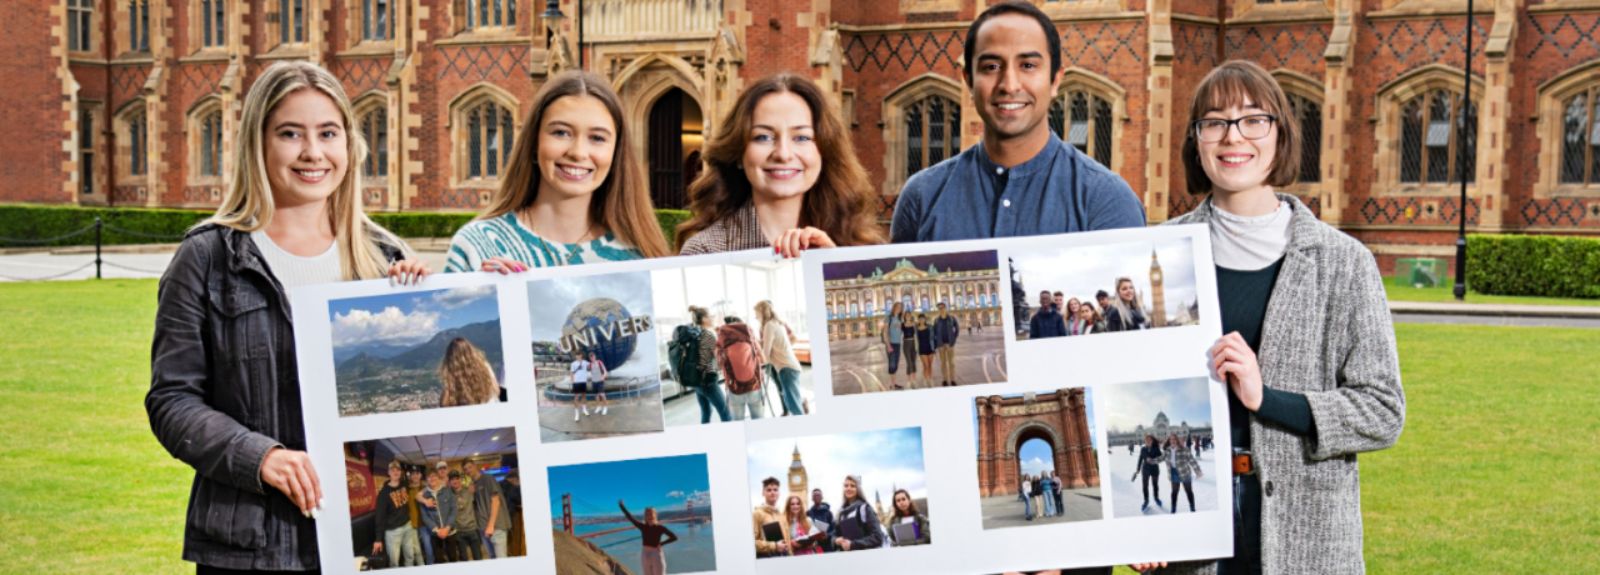 students standing outside holding a banner with travel images